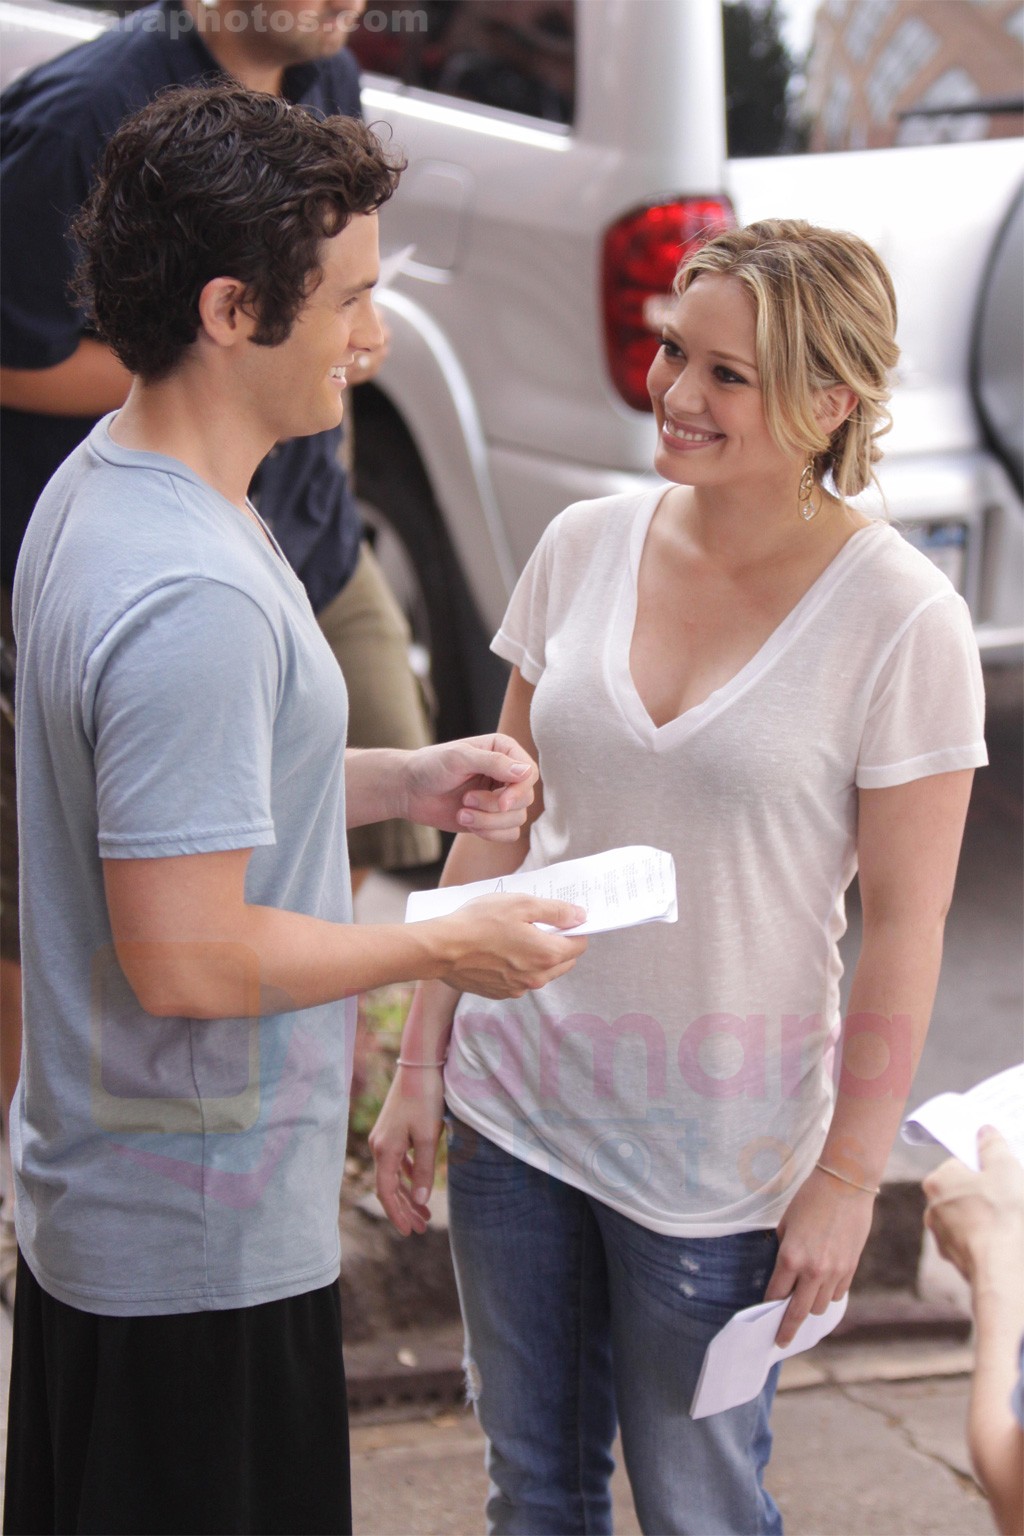 Hilary Duff and Penn Badgley On The Set Of GOSSIP GIRL in New York City on 26th August 2009 